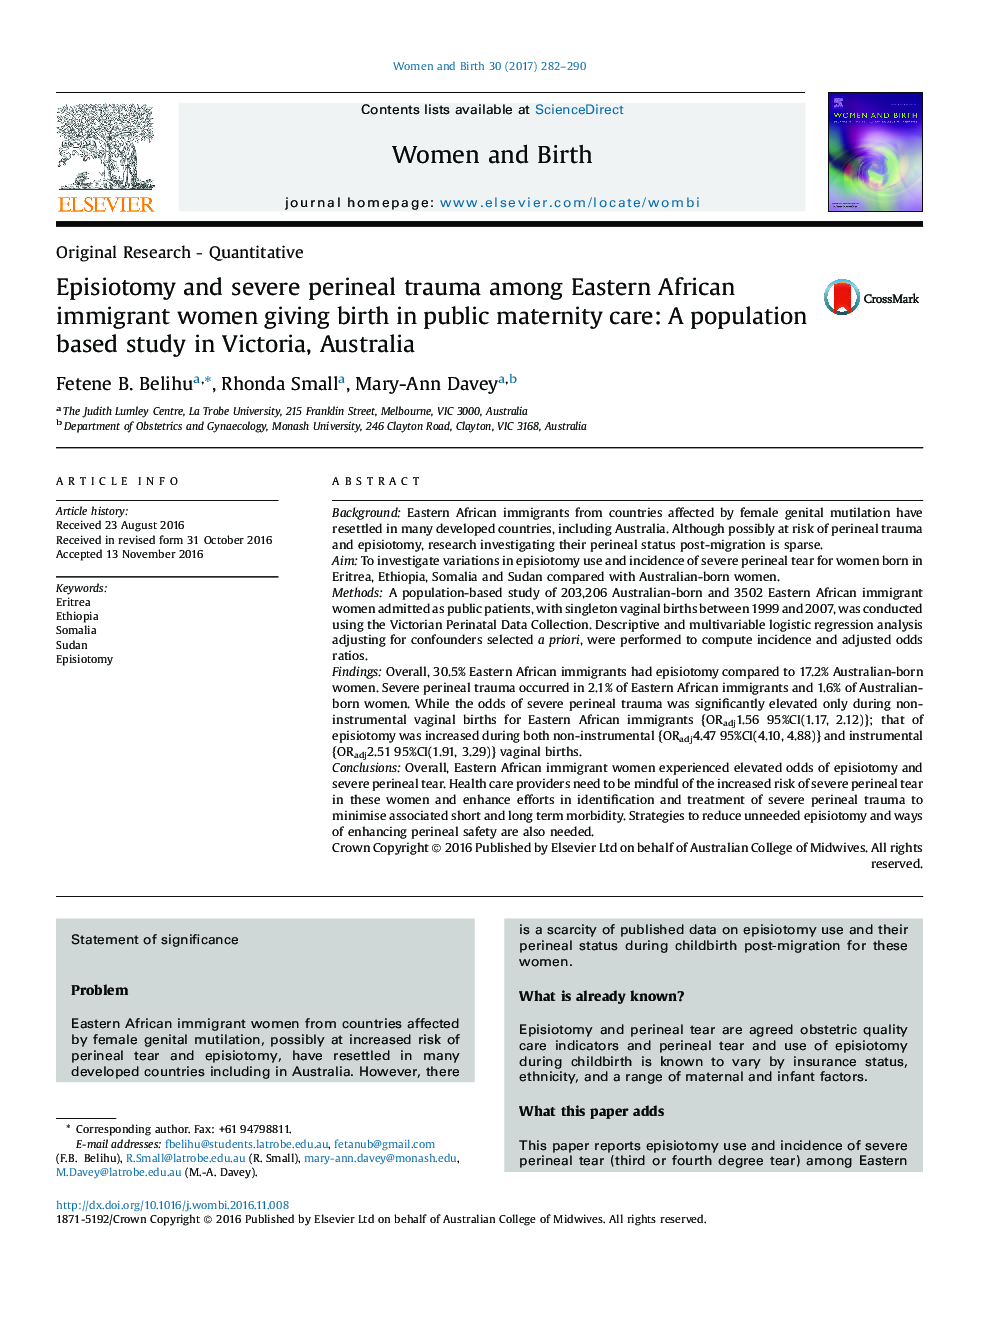 Episiotomy and severe perineal trauma among Eastern African immigrant women giving birth in public maternity care: A population based study in Victoria, Australia